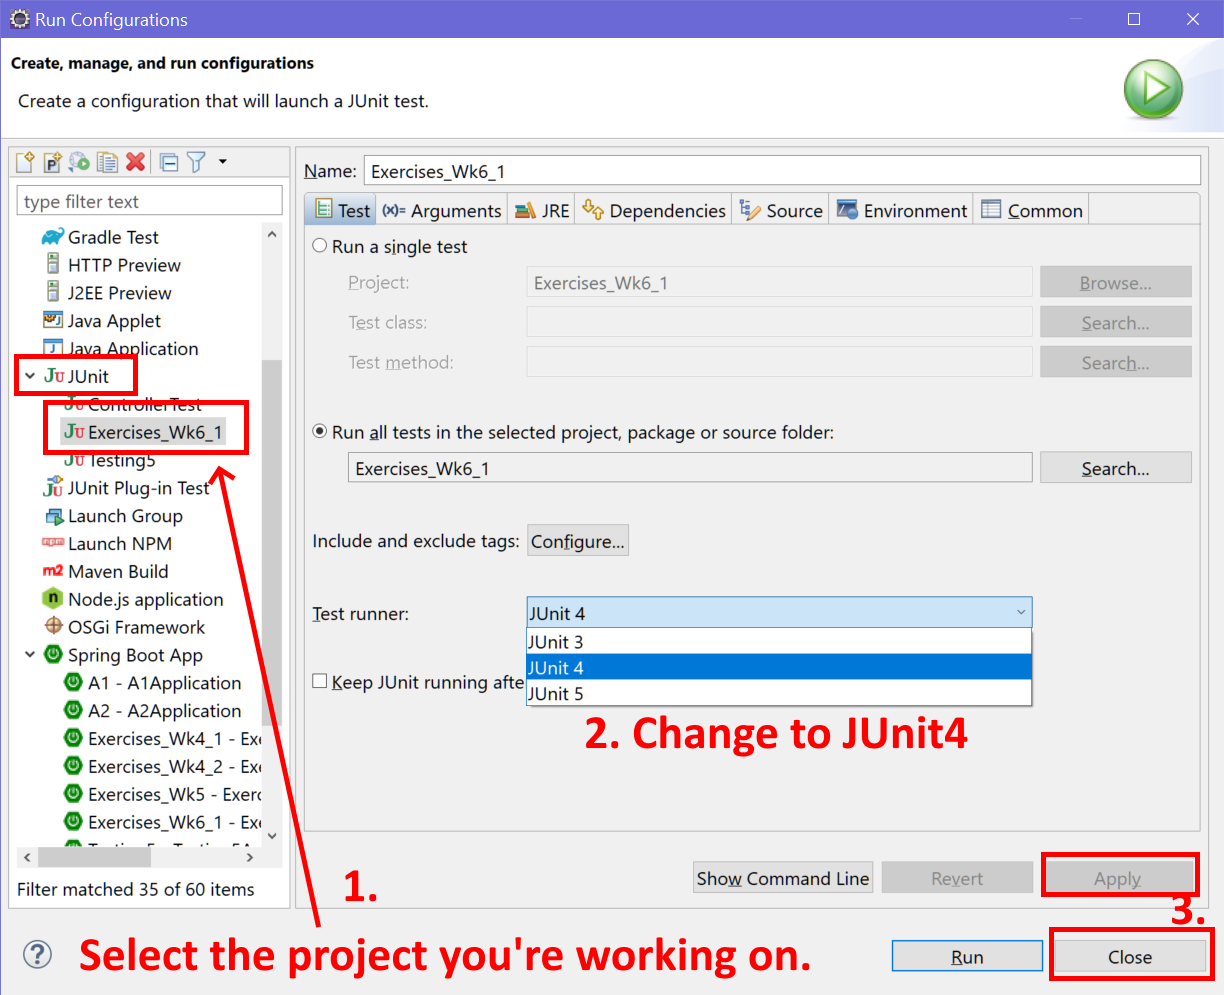 In the Junit item, select your current project, then change test runner to junit 4 from the drop down list